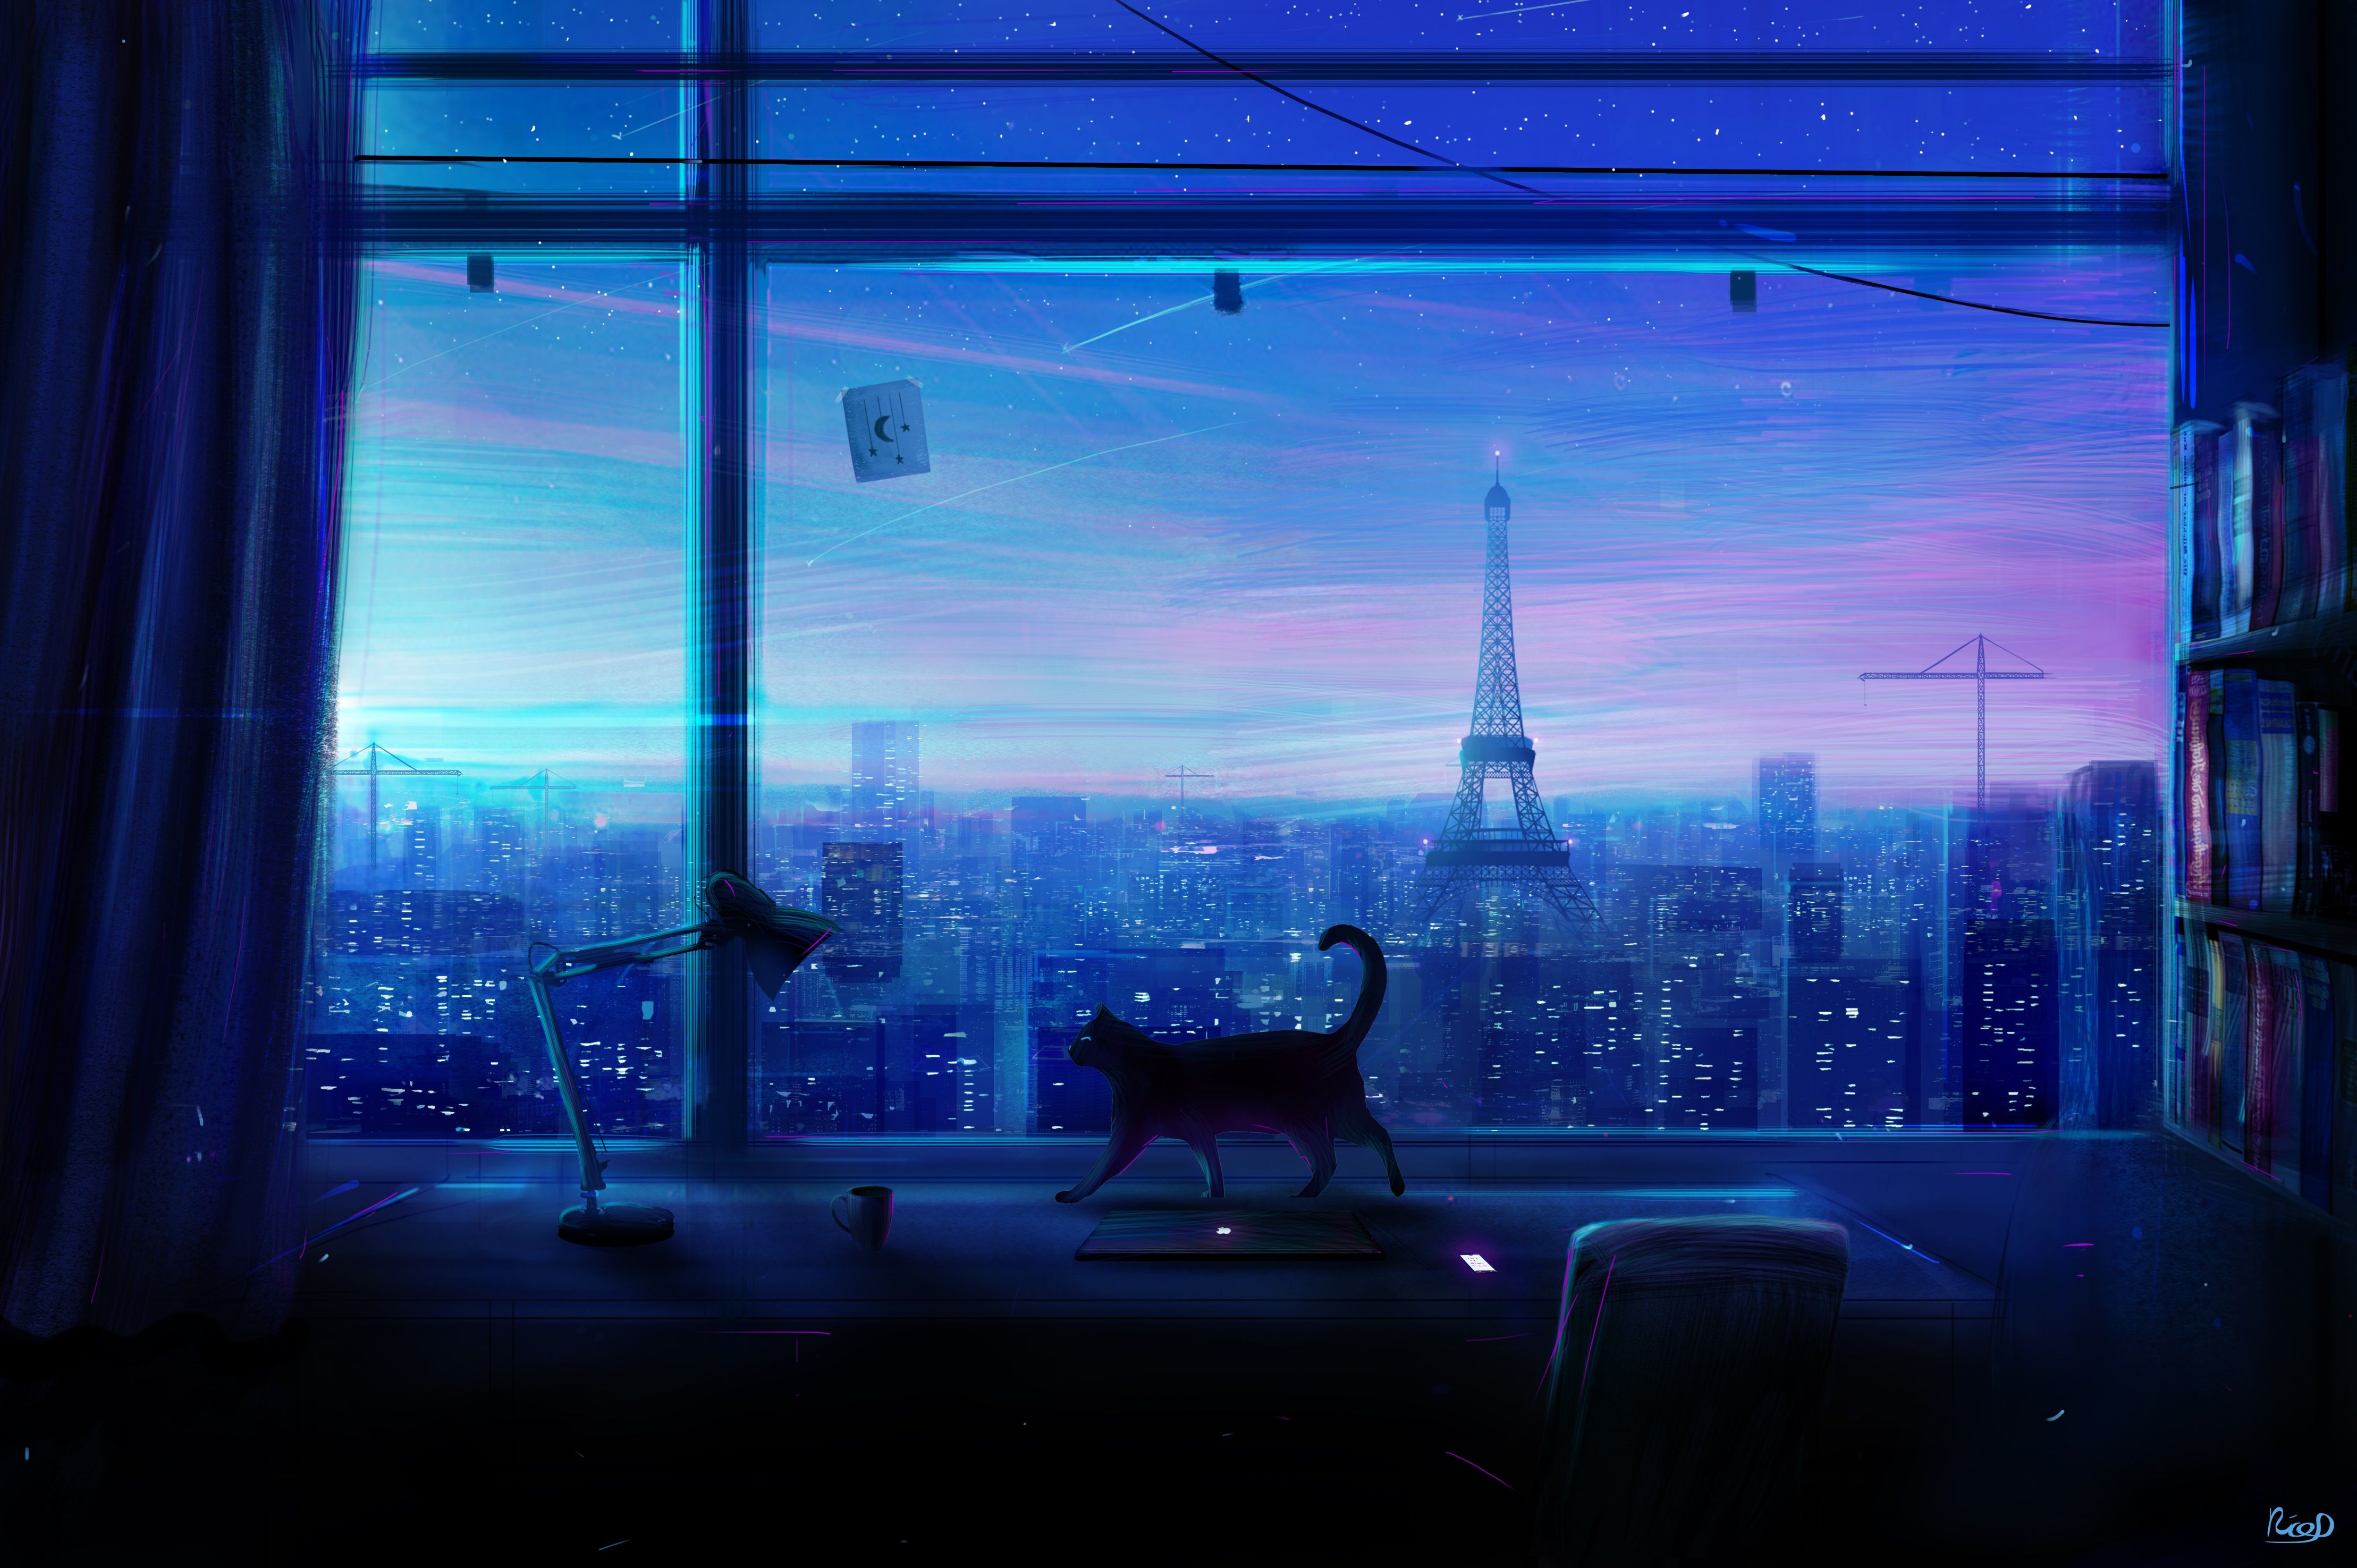 A cat standing on a desk in a room with a large window looking out at a city at night - Anime city